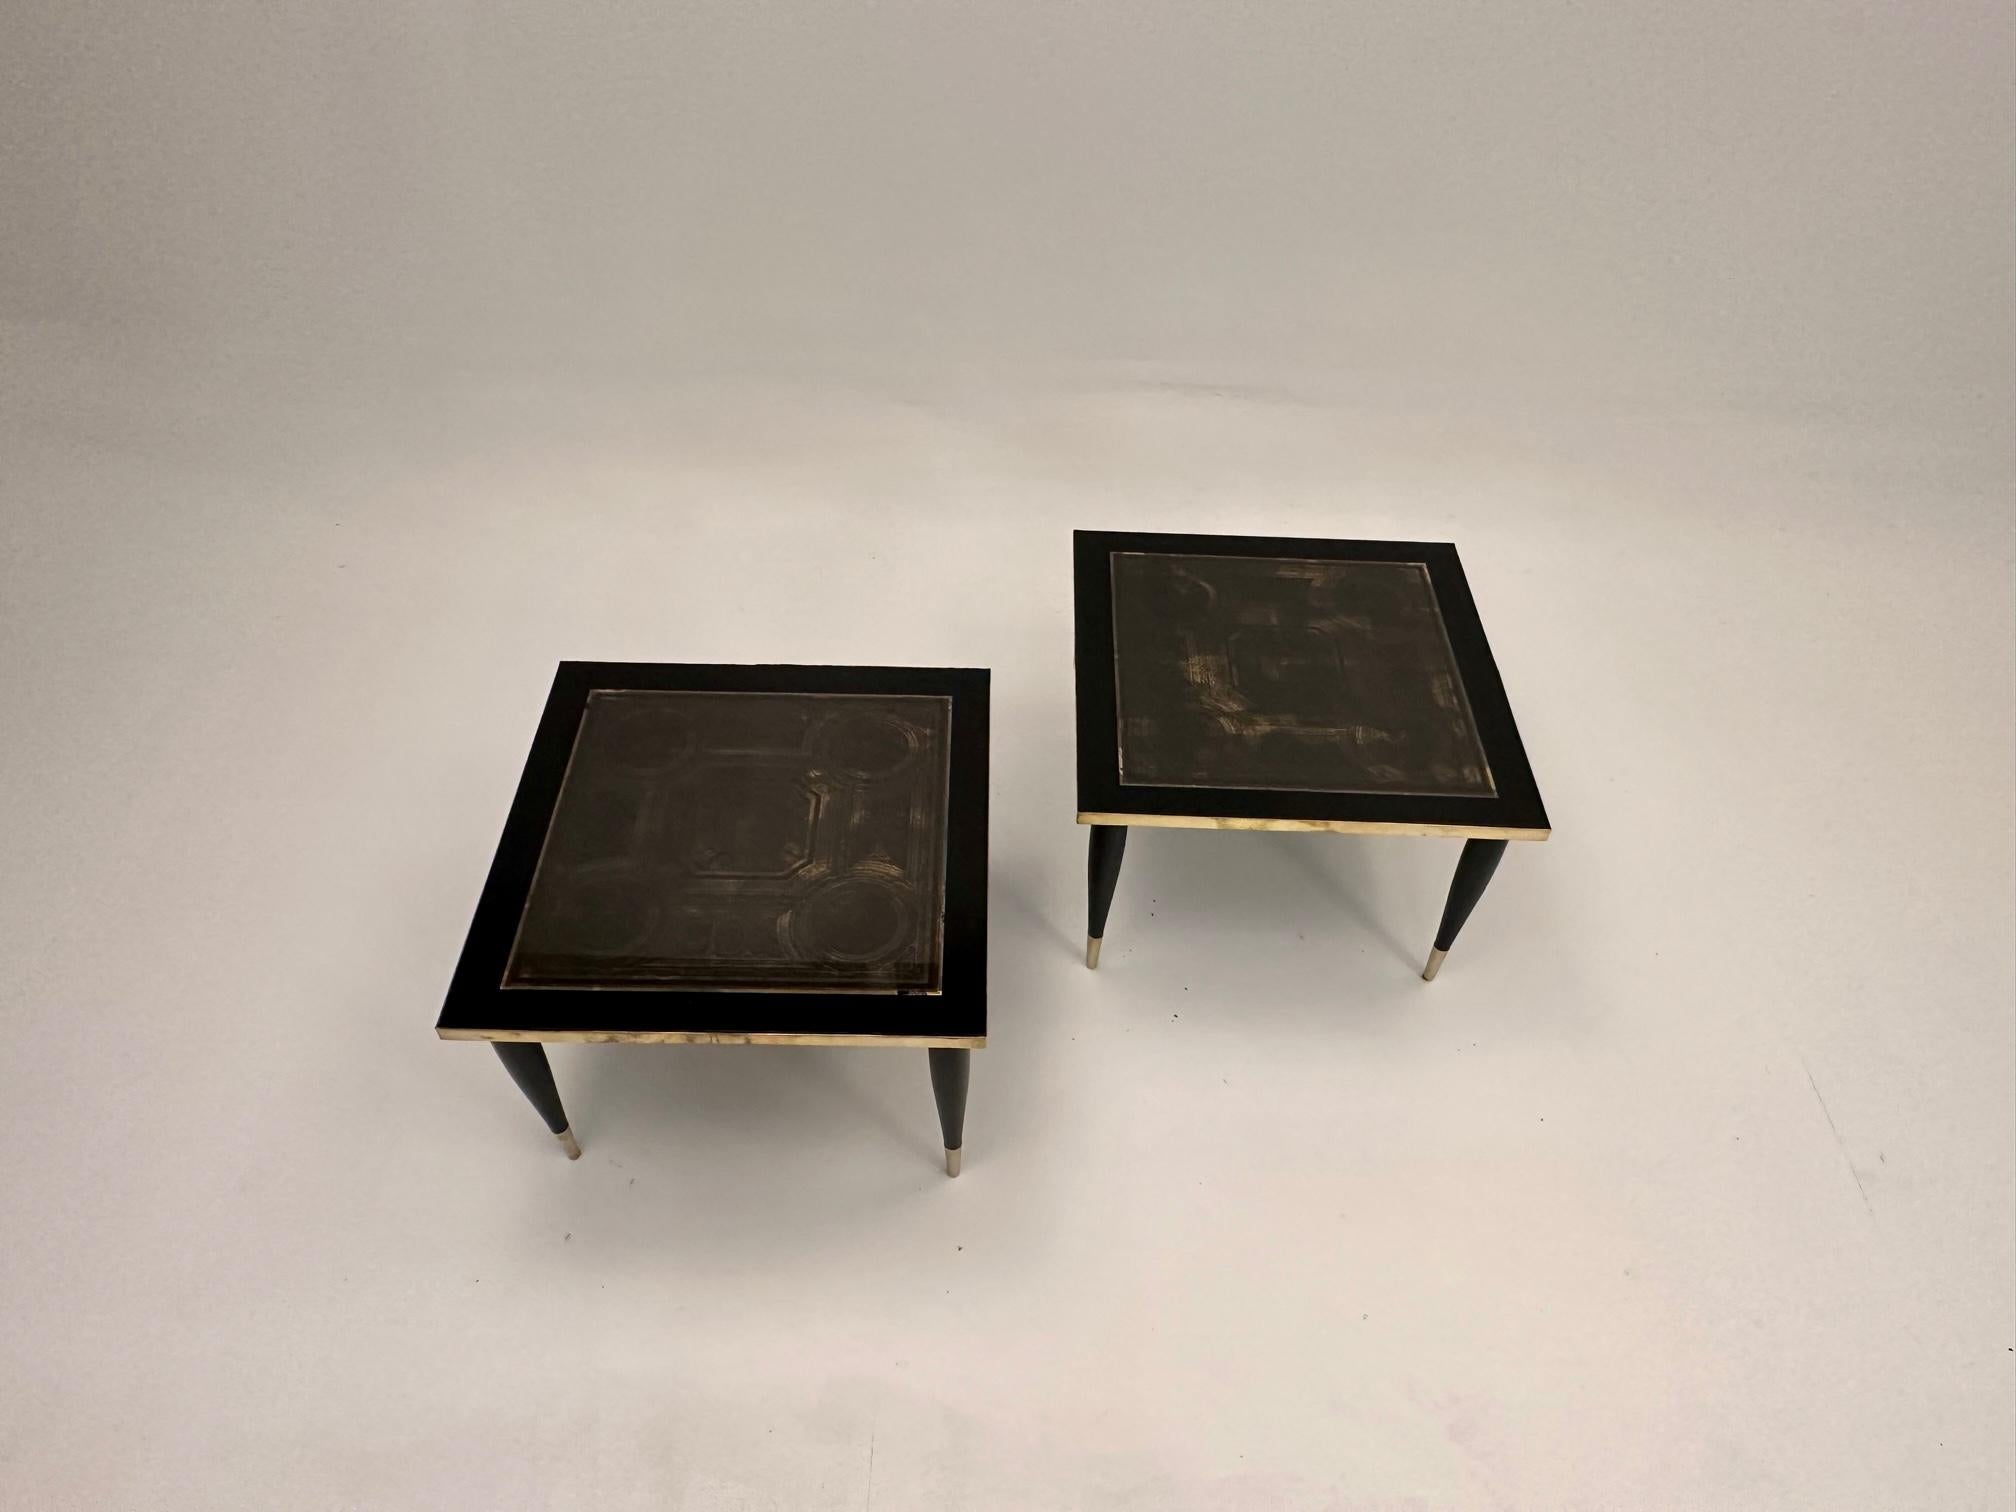 Chic pair of black and gold square low end tables in the style of Fornasetti having reverse painting on glass tops with stylish decorative neoclassical forms.  The legs are tapered and terminate in brass caps.  There's also brass banding around the